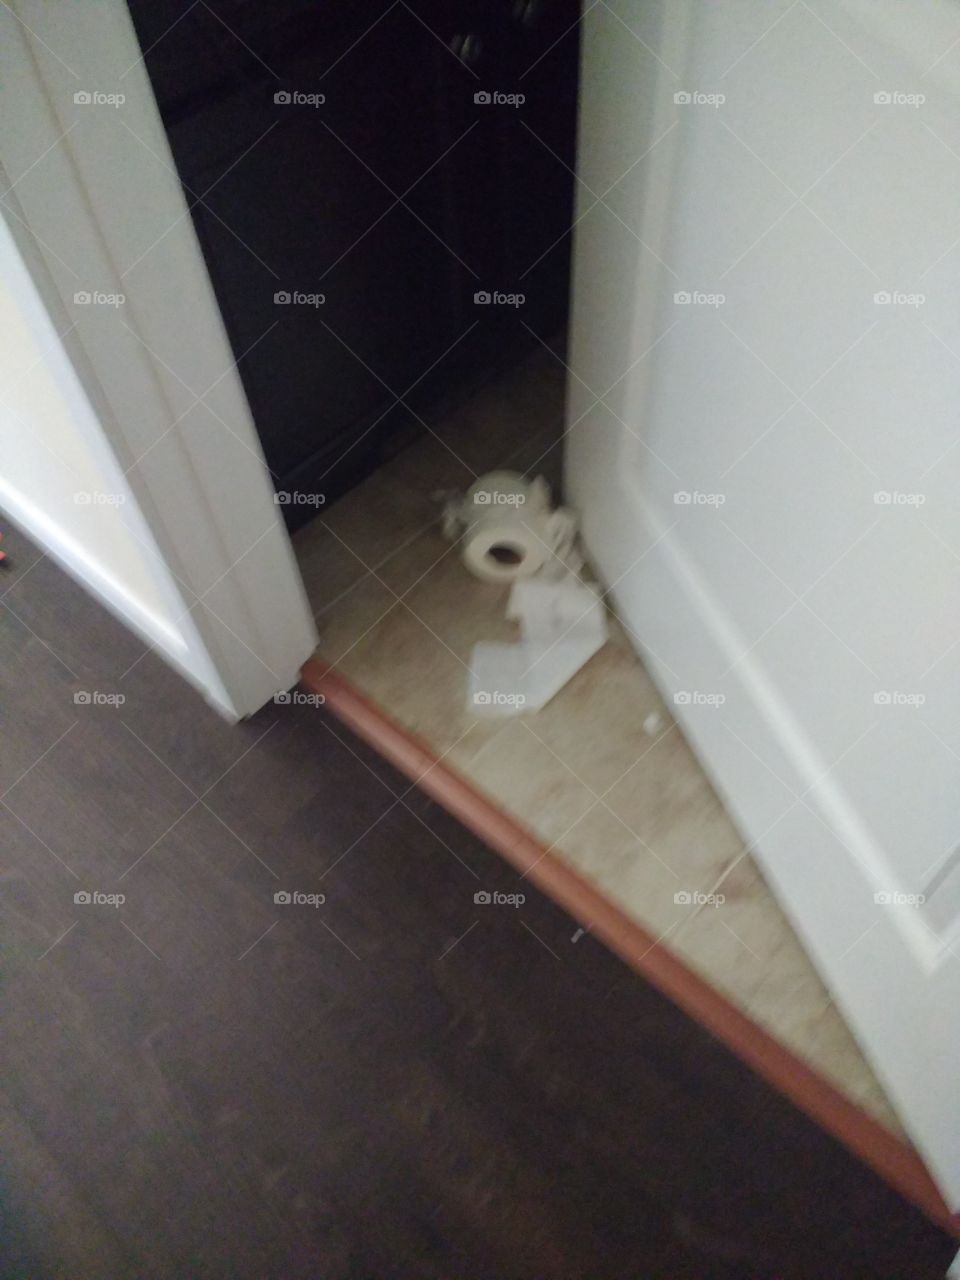 our cat got hold of a roll of toilet paper.